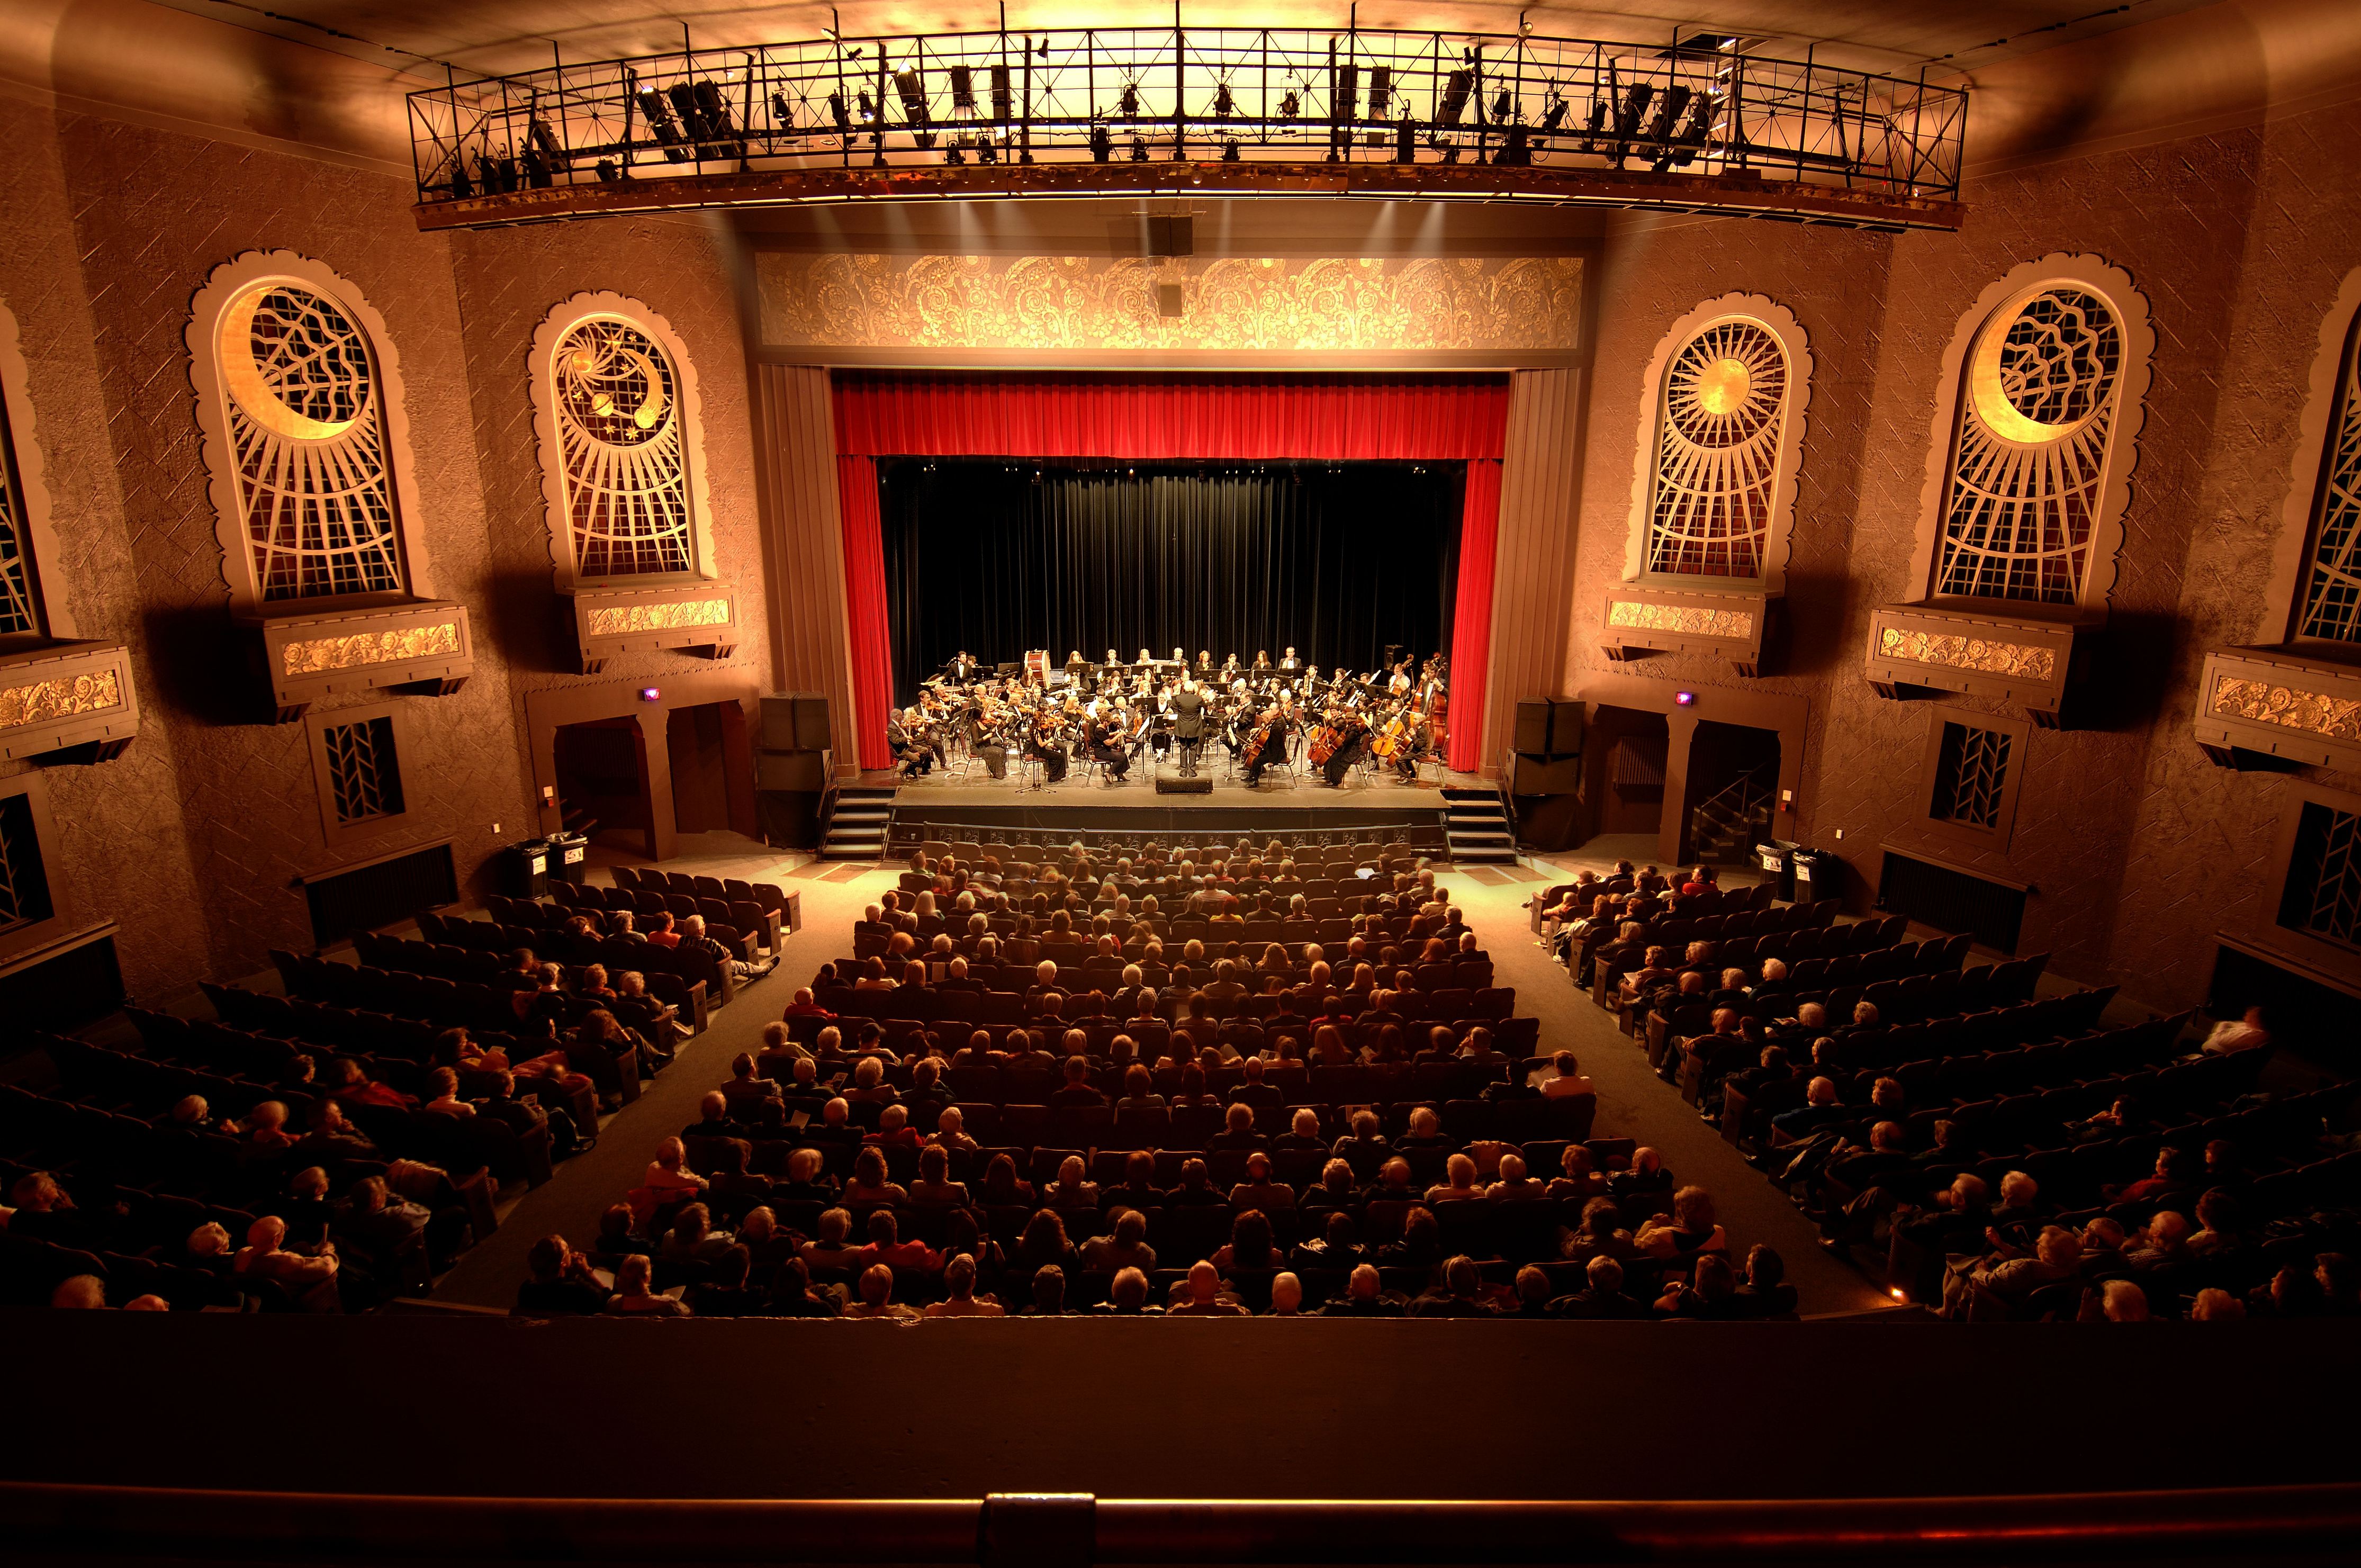 The interior of Capitol Centre in North Bay; a stately old theatre with elegant molded celestial motifs on the walls, and golden spotlights. The rows of seating are filled with audience members and there is an orchestra on stage. 